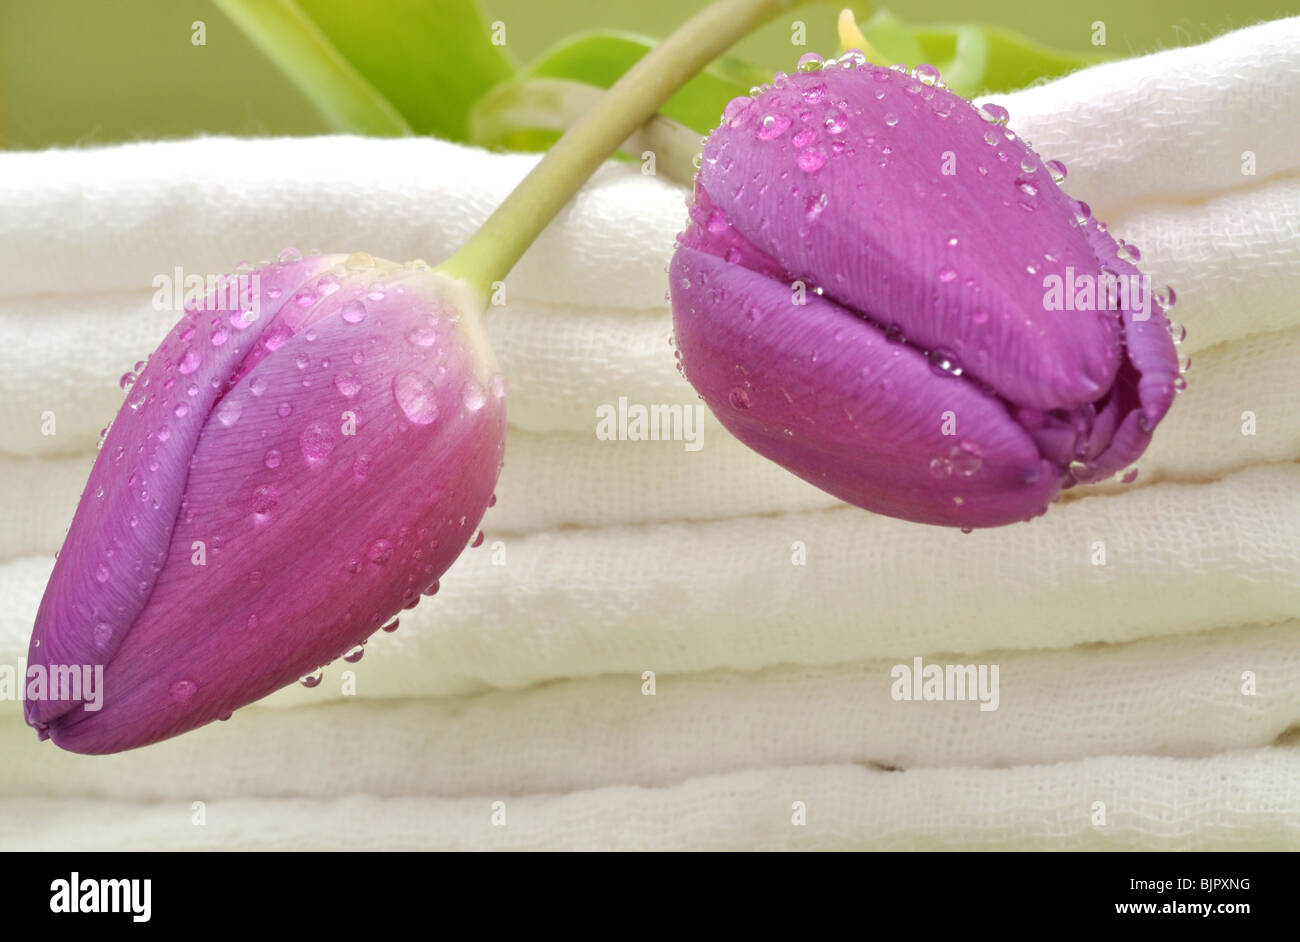 Wet purple tulips on a pile of cotton towels Stock Photo